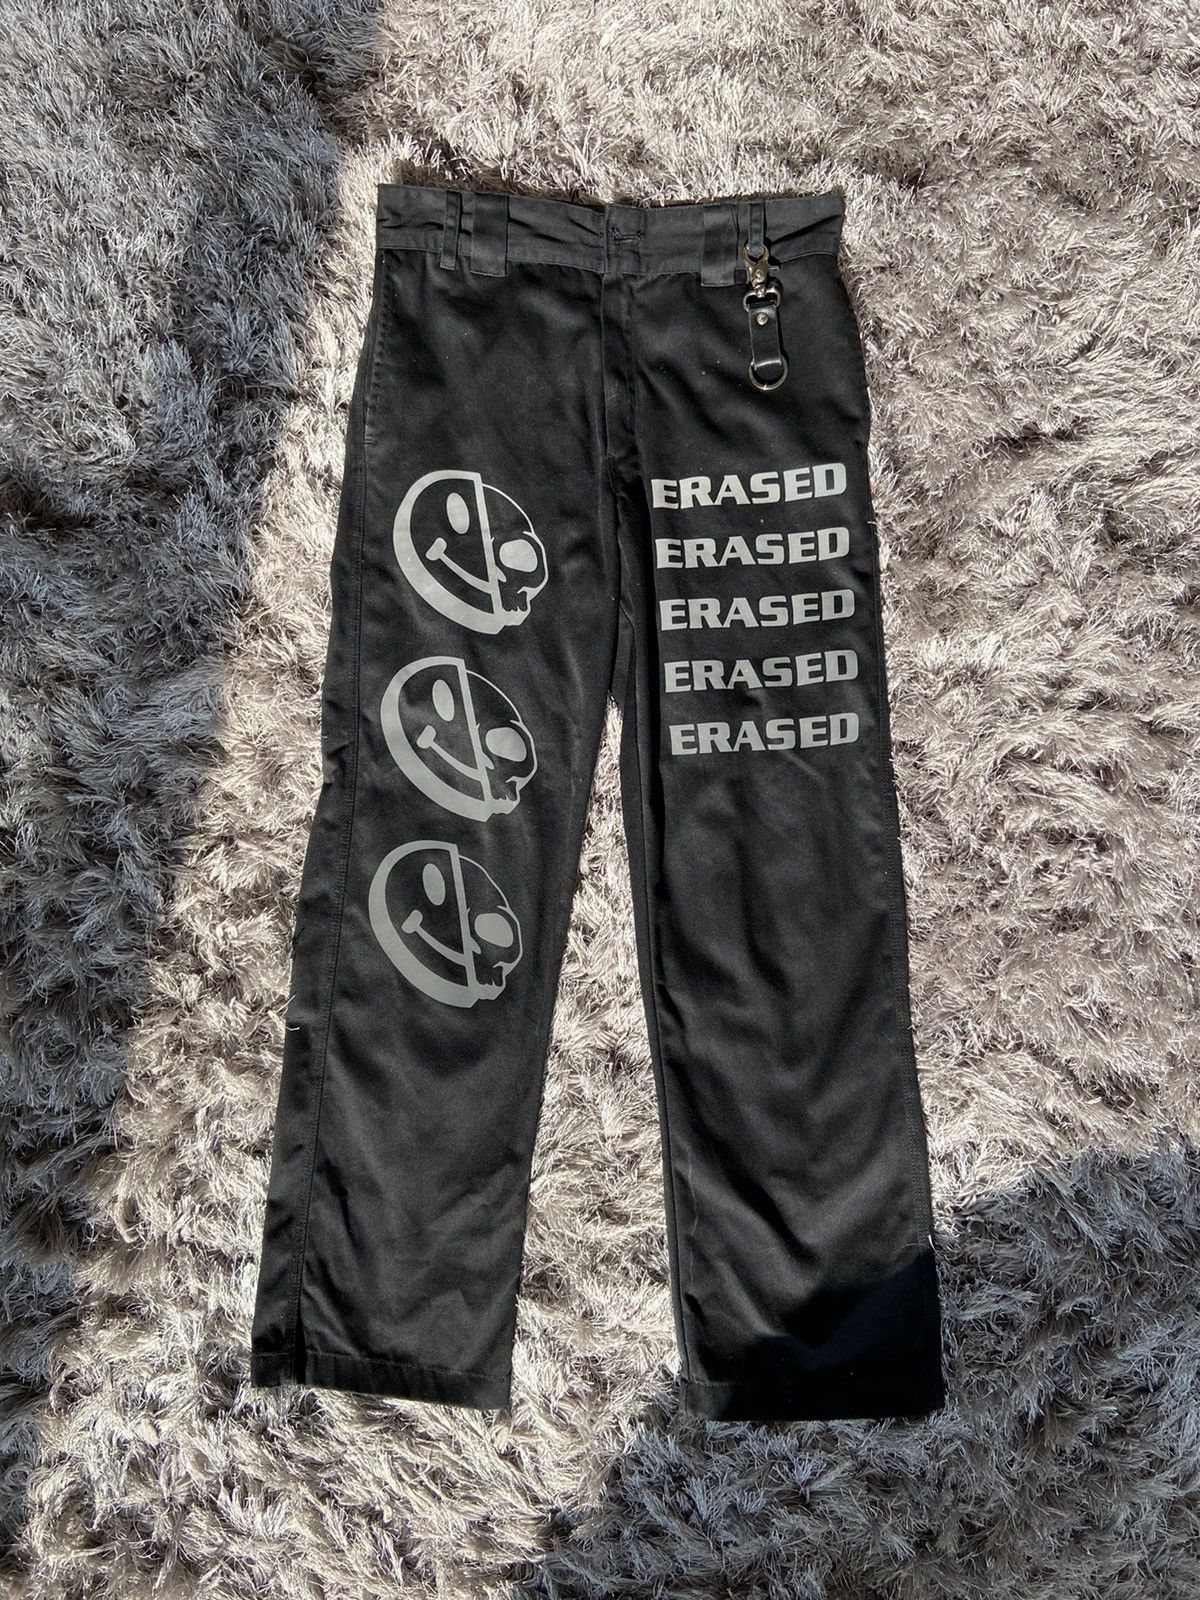 Erased Project Erased Project Limited Edition Reflective Pants | Grailed